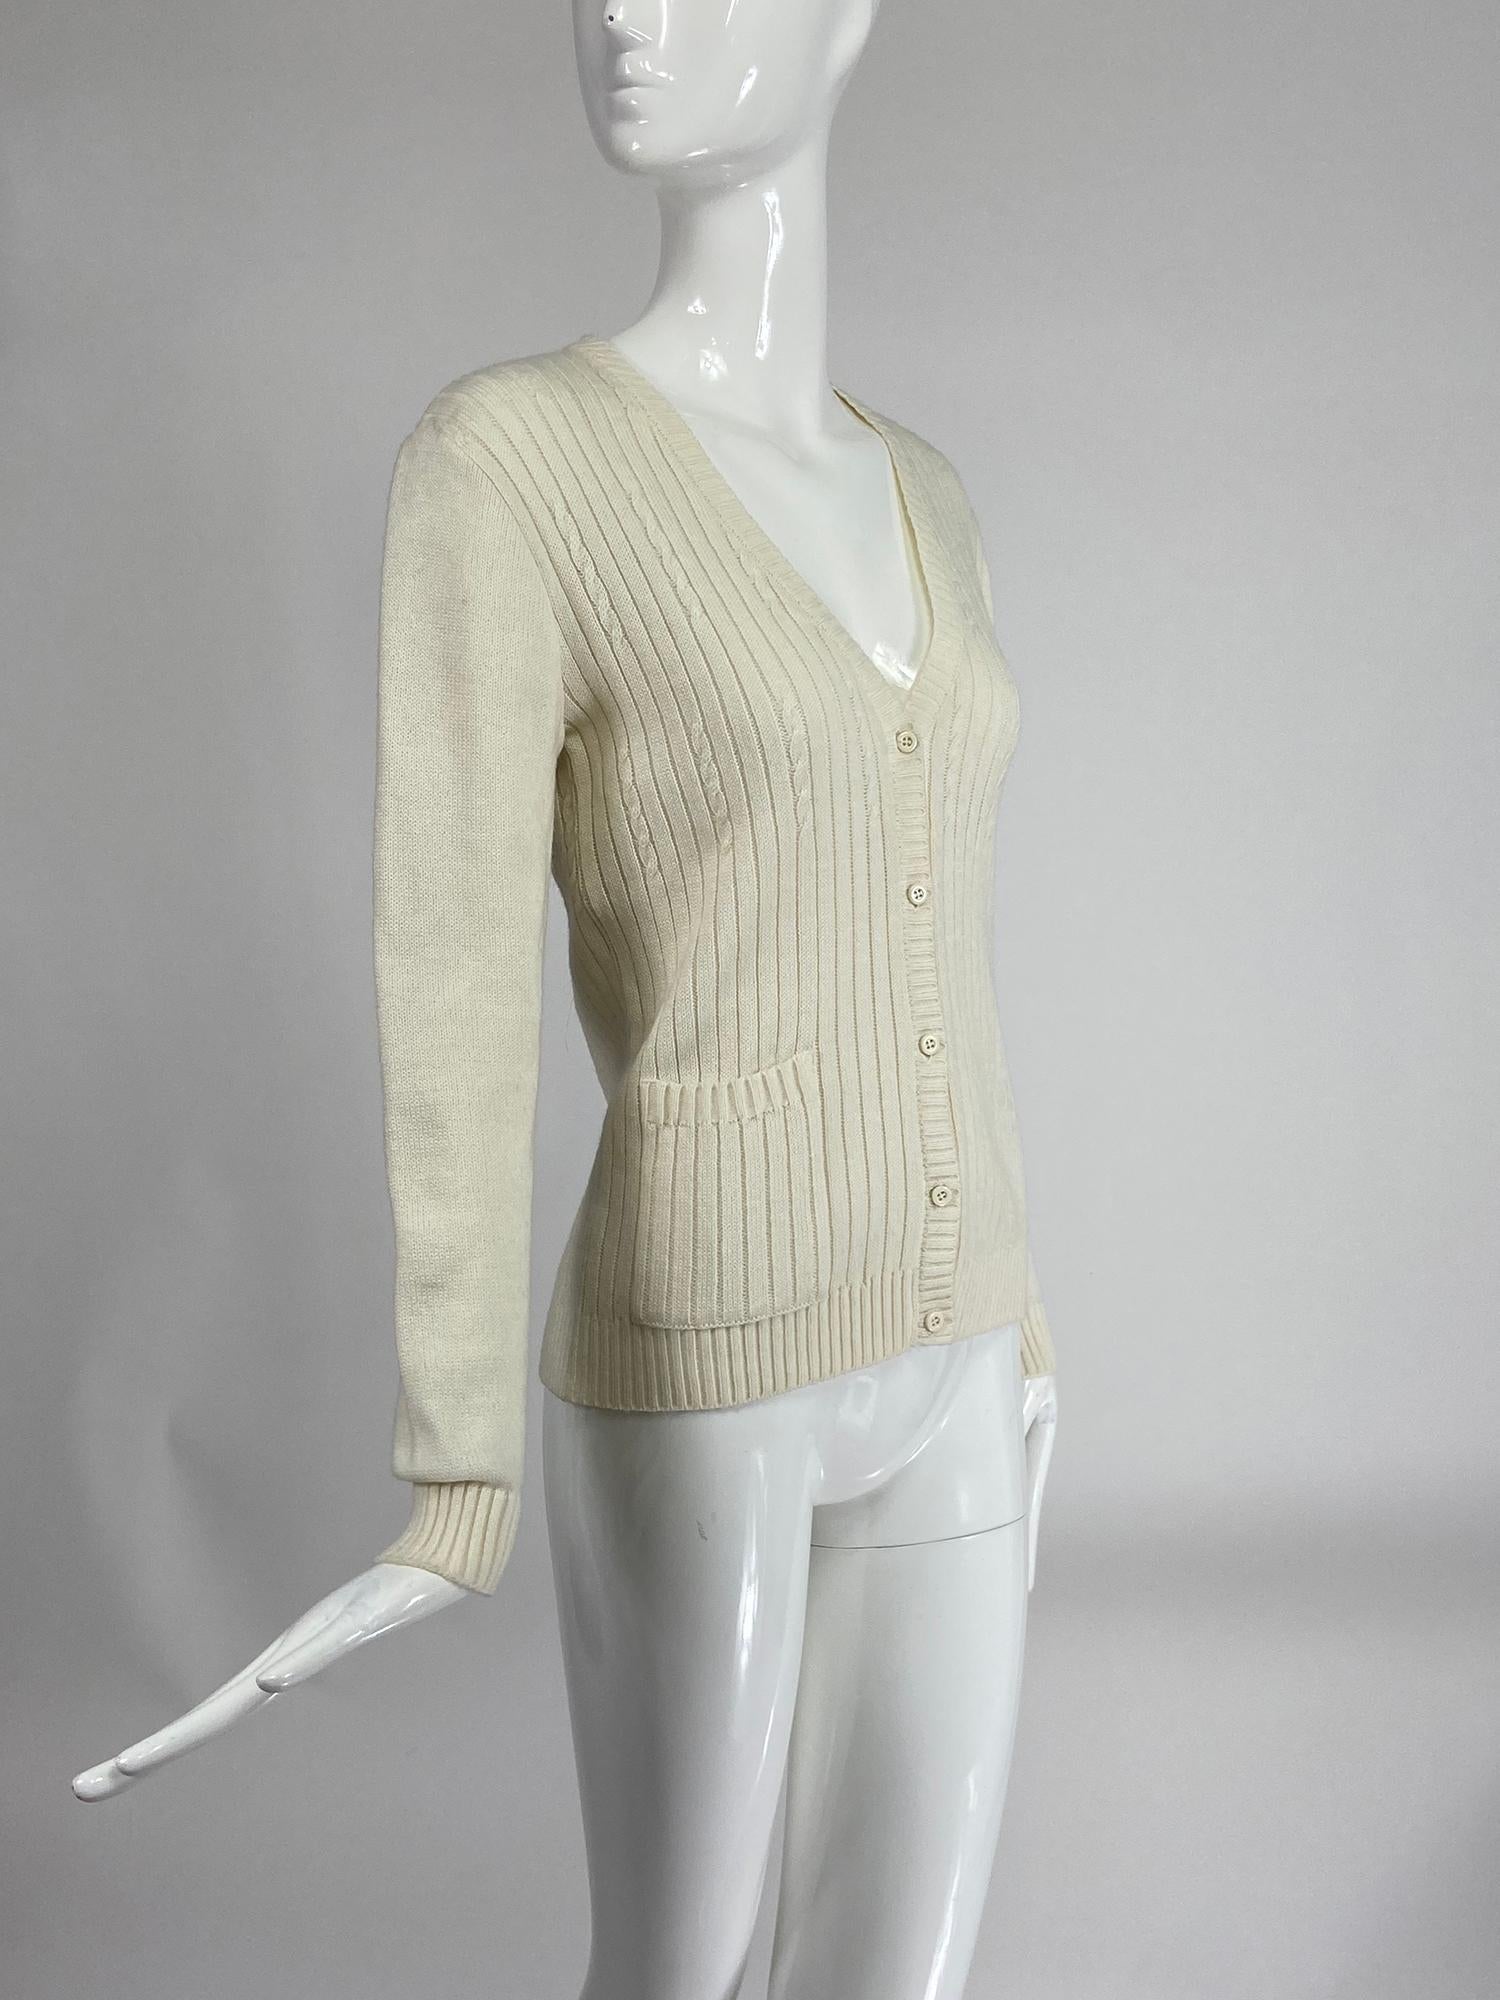 Courreges off white ribbed and cable knit cardigan sweater. Long sleeve, V neck sweater, the body of the sweater is done in rib knit with interspersed rows of cable knit. The sleeves are plain knit with ribbed cuffs. Ribbed facings, the sweater